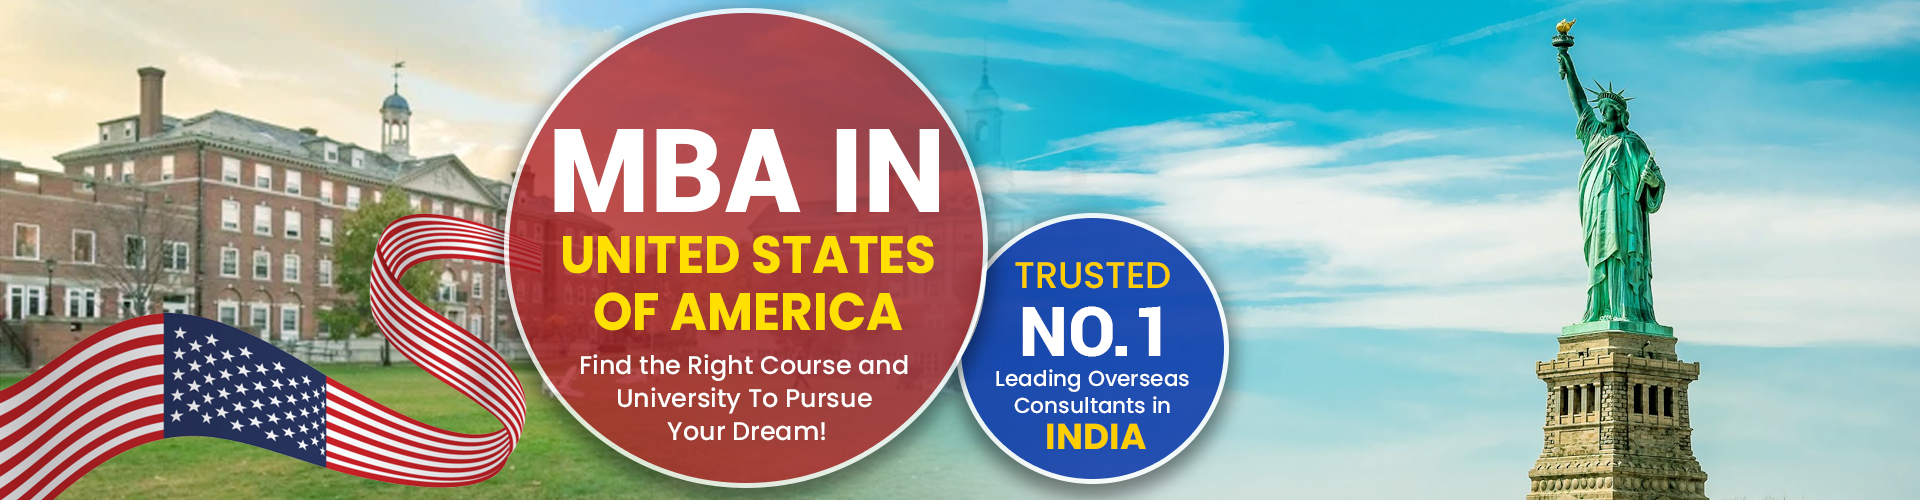 mba-in-usa